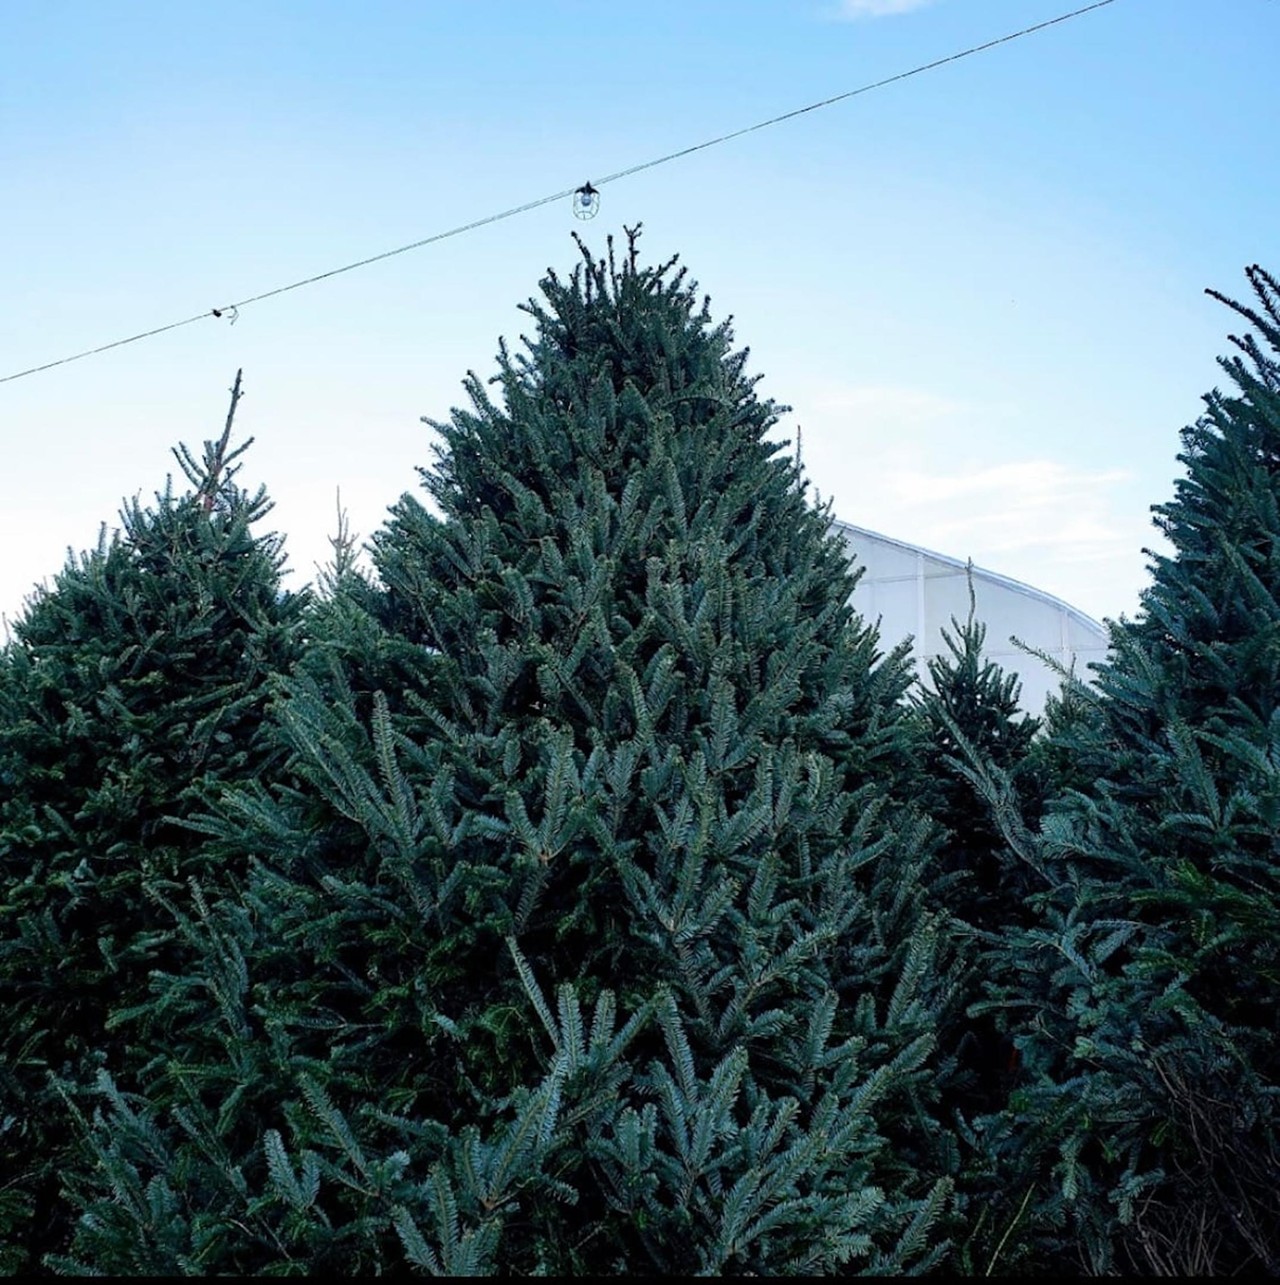 Station Road Farm & Landscaping
6749 Station Road, West Chester
Christmas trees and greenery will be available at Station Road Farm and Landscaping starting the day after Thanksgiving. Fresh, decorative wreaths will also be available. 
Open 10 a.m.-7 p.m. starting Nov. 24.